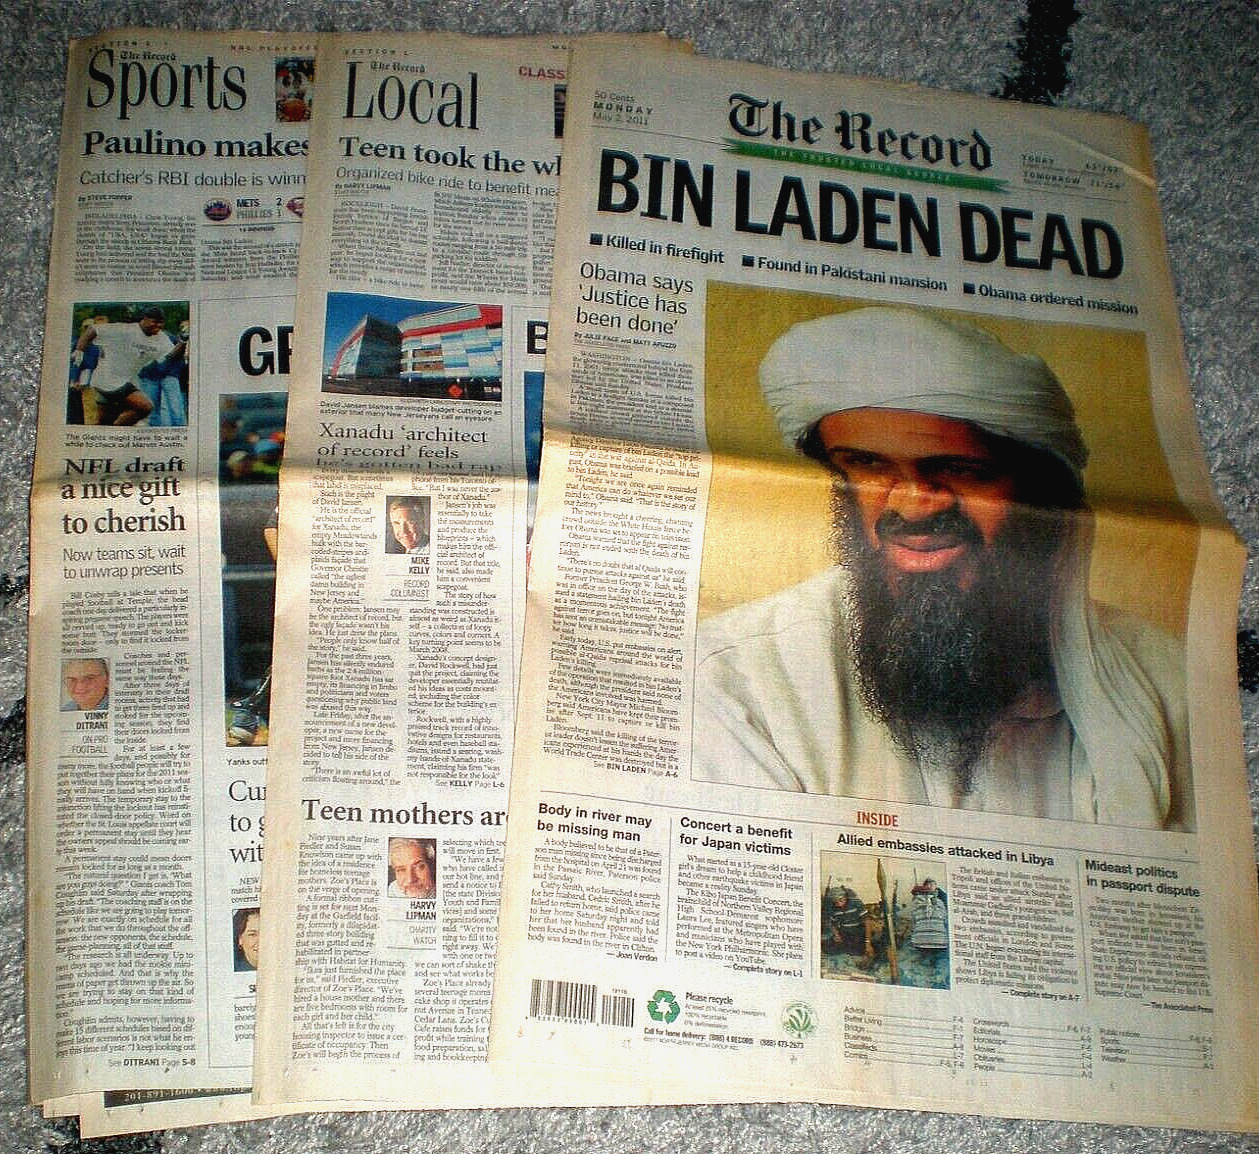 BIN LADEN DEAD MAY 2, 2011 FULL NEWSPAPER EXCELLENT CONDITION COLLECTABLE